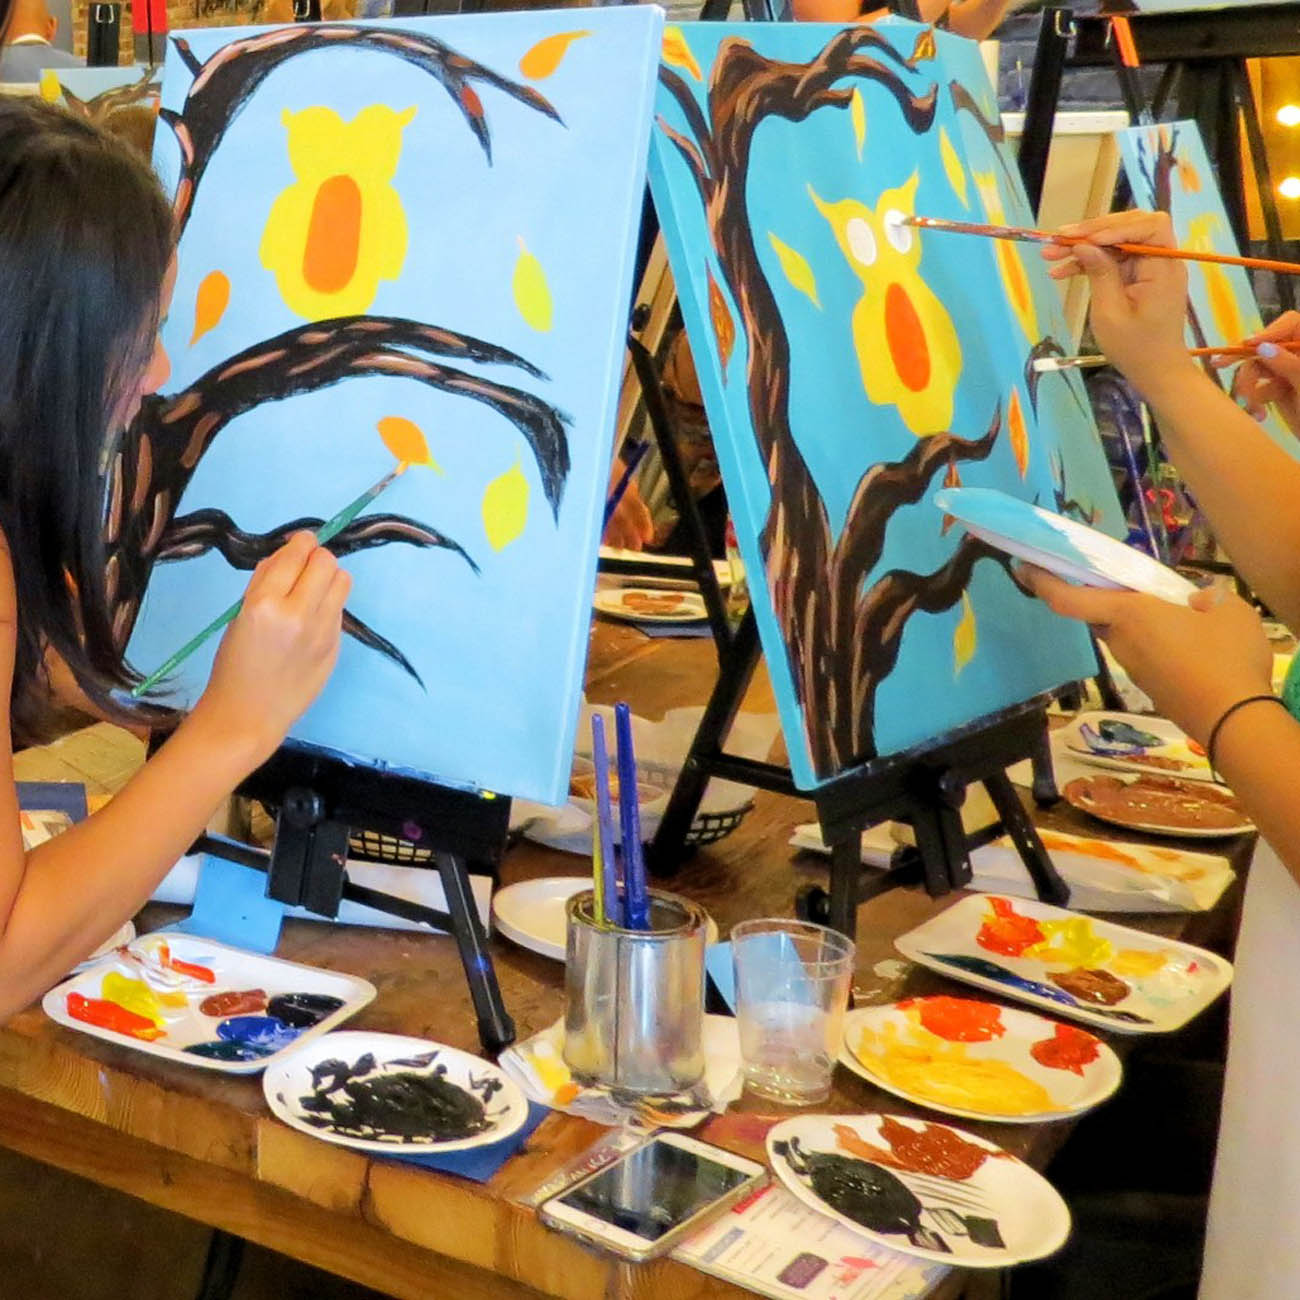 partygoers paint owls on blue canvases at a paint and sip party.